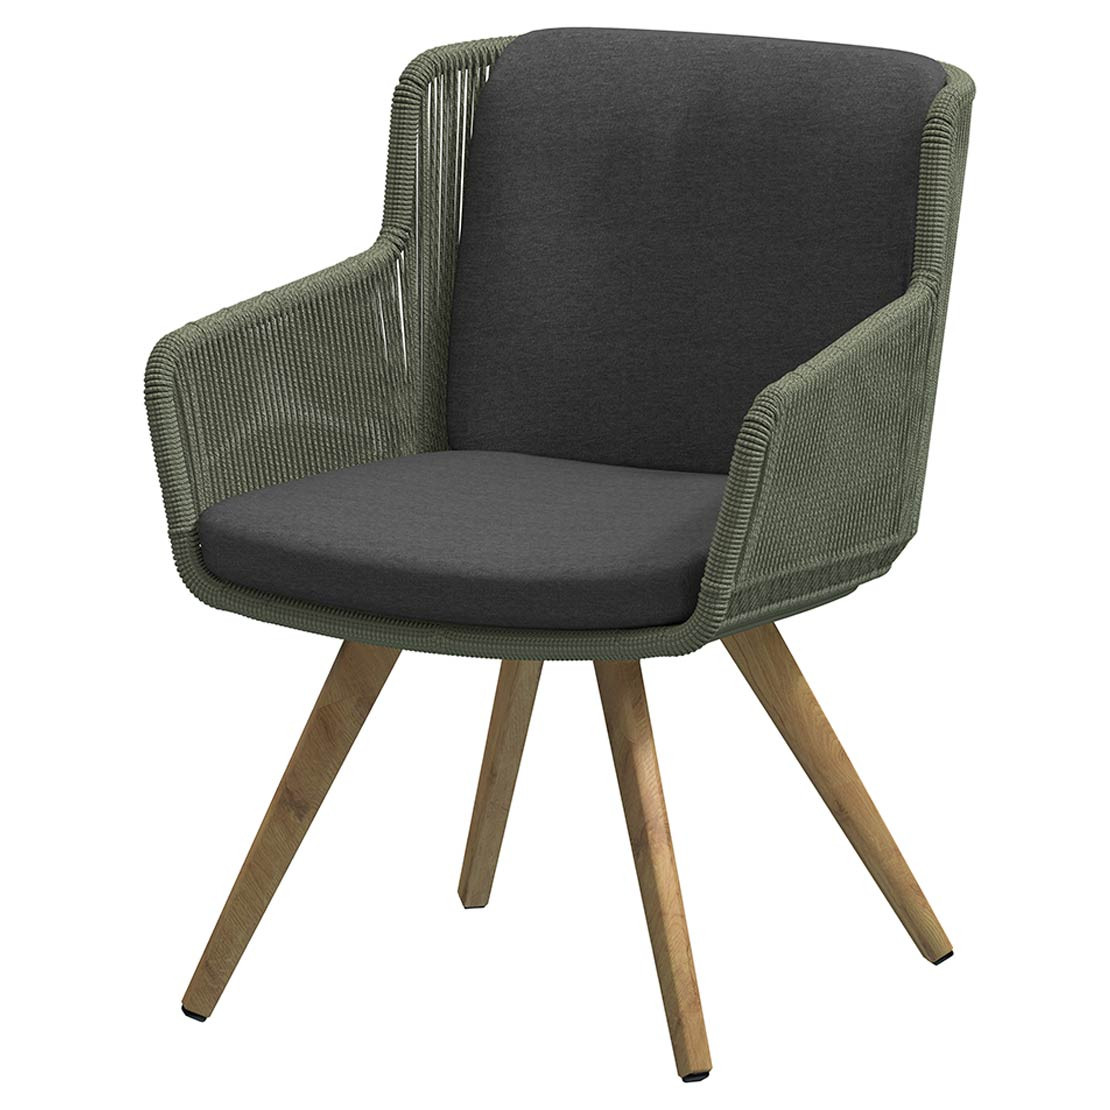 Flores dining chair Teak legs Green with 2 cushions